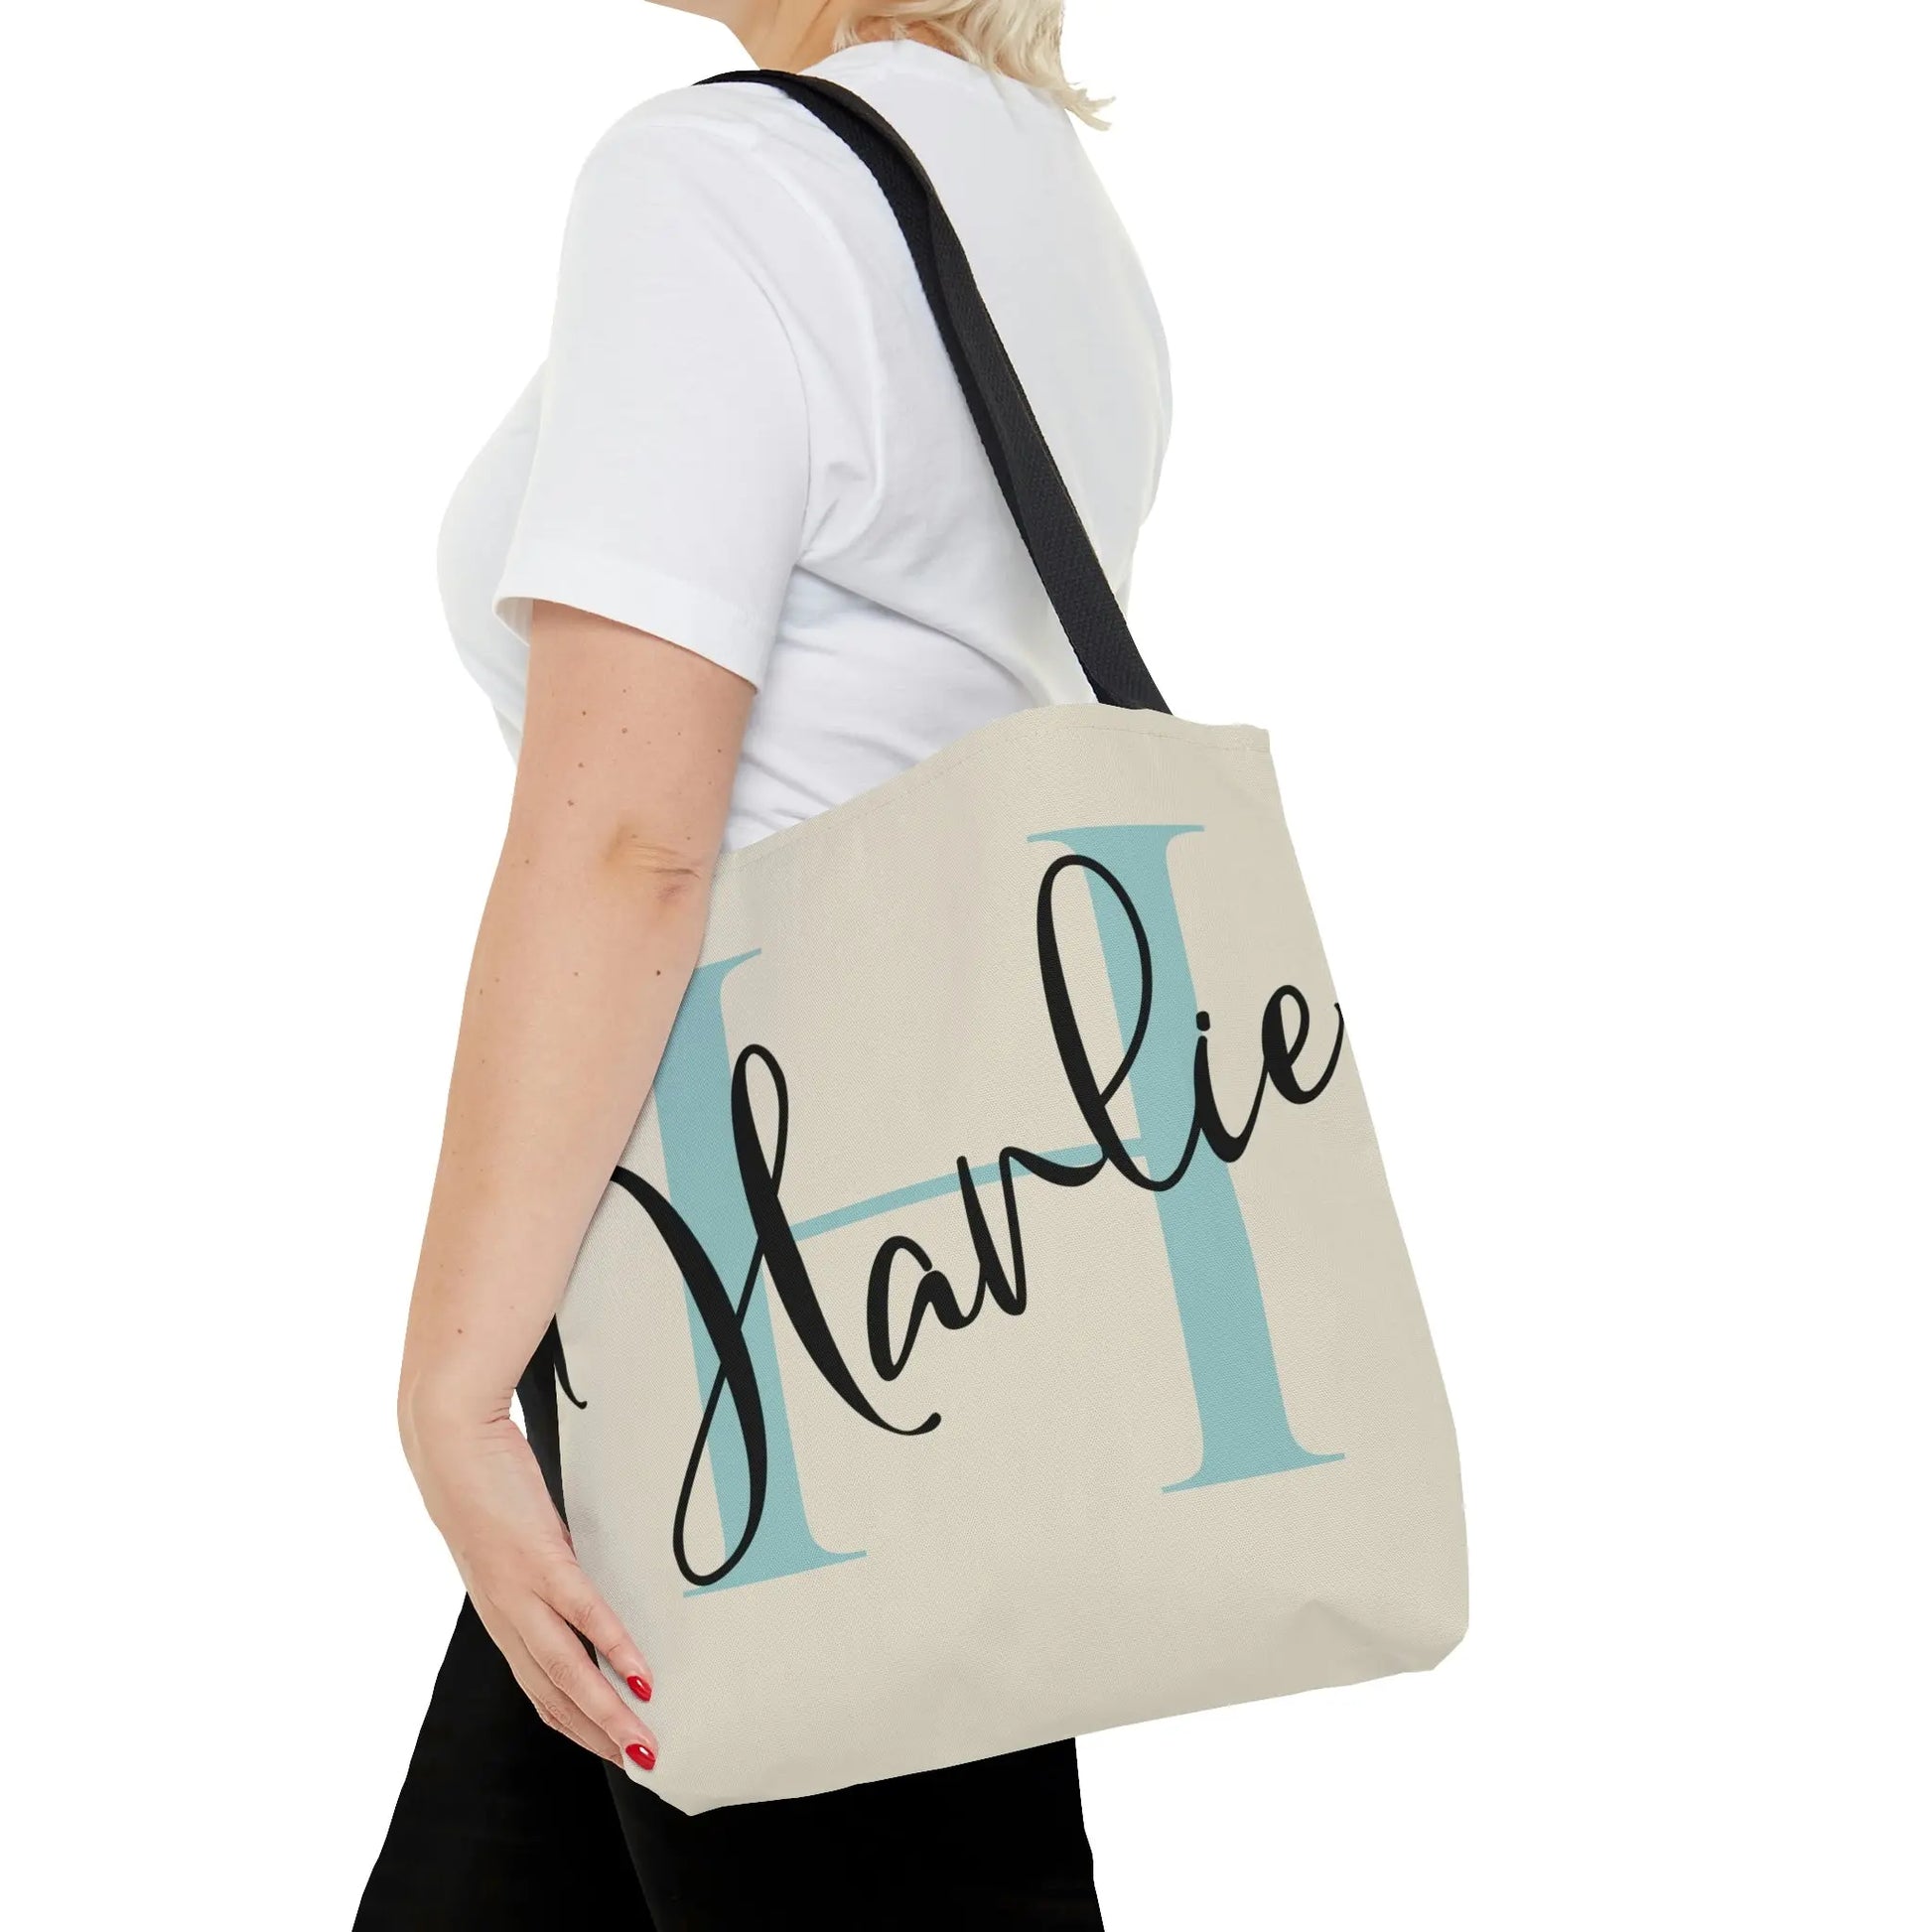 Bridal Party Monogram Tote Bags  Personalized Monogrammed Tote